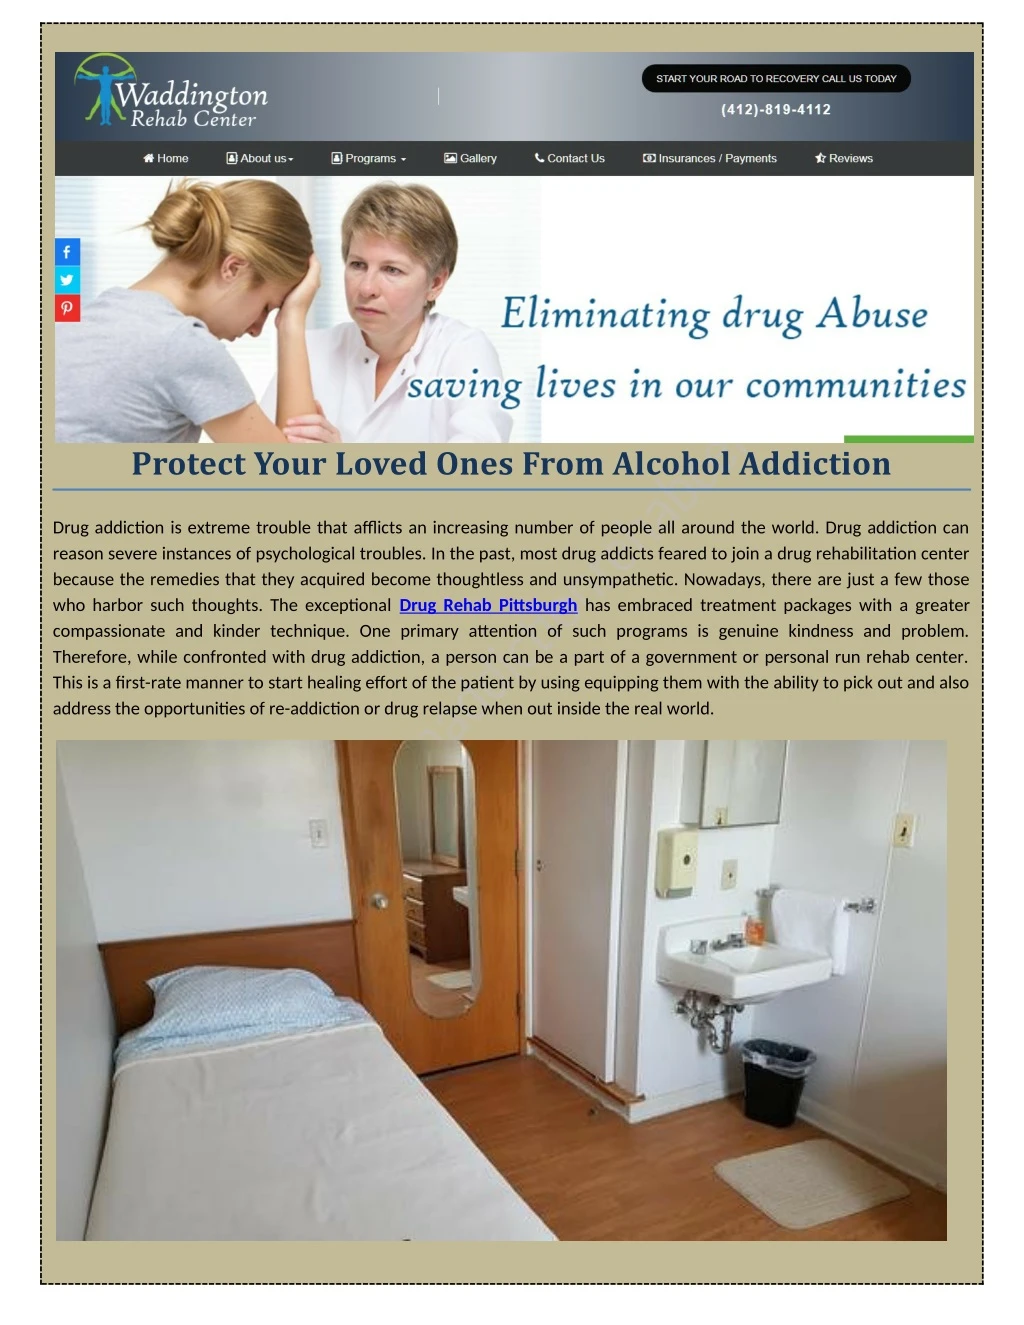 protect your loved ones from alcohol addiction